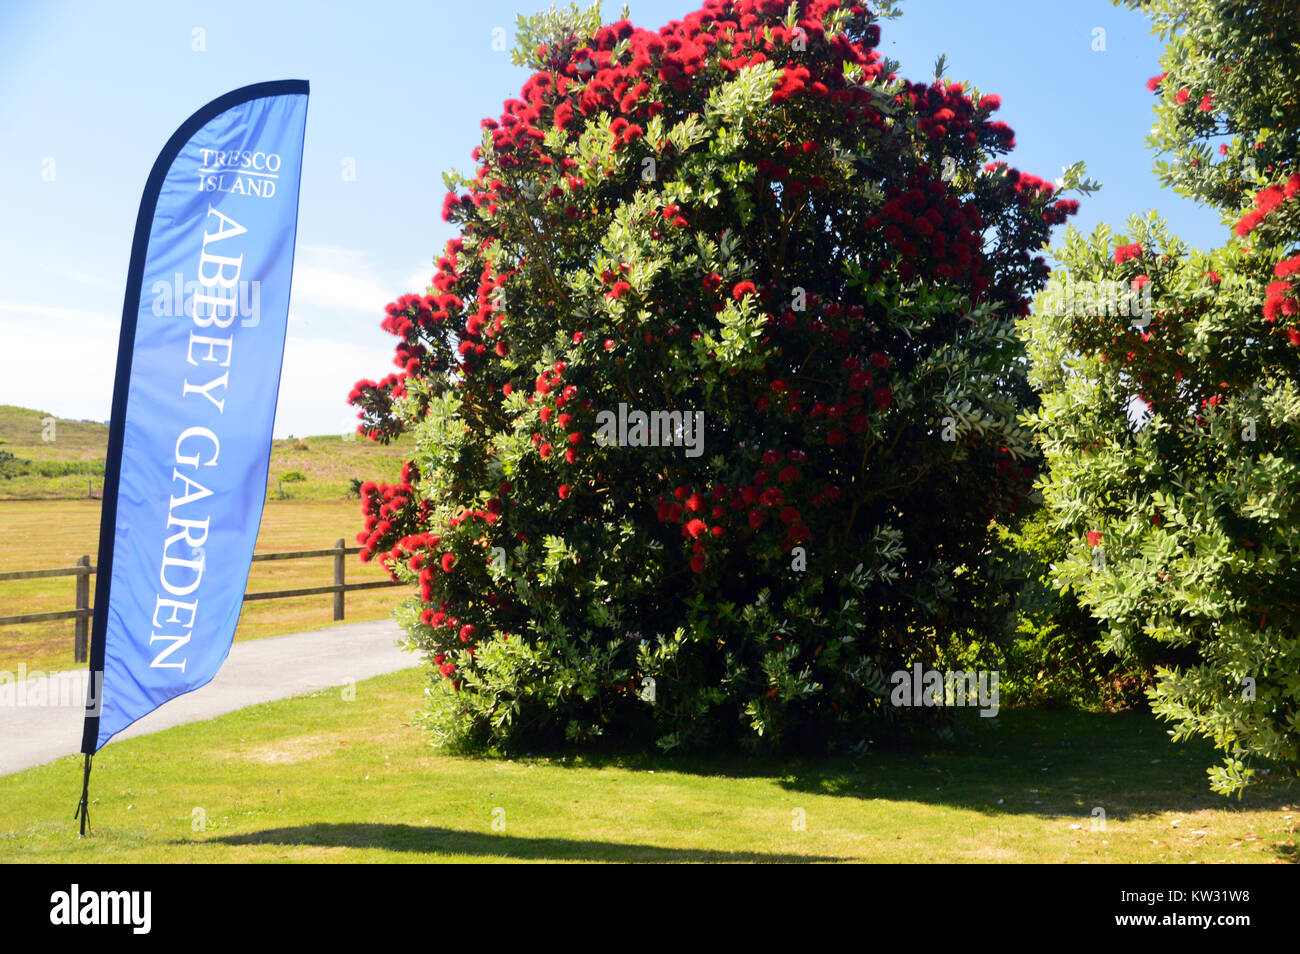 Blue Flag and the Red Flowers of the Metrosideros Robusta Tree at the Entrance to the Abbey Gardens, Tresco Island, Isles of Scilly, Cornwall, UK Stock Photo